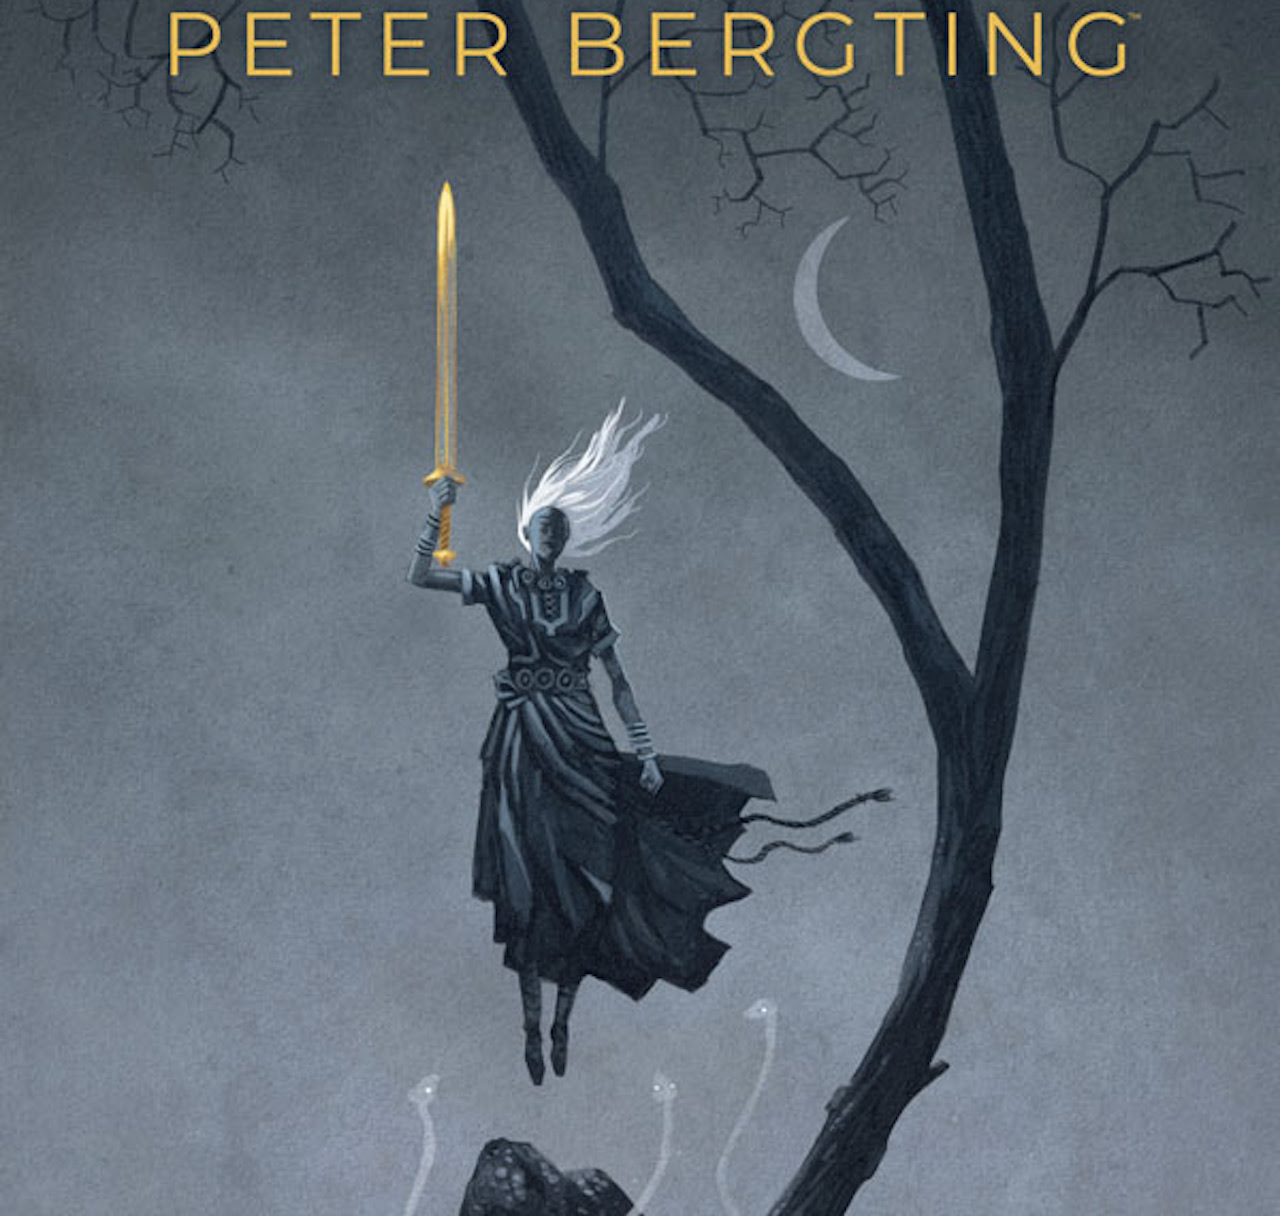 Dark Horse Books to publish 'The Art of Peter Bergting' hardcover